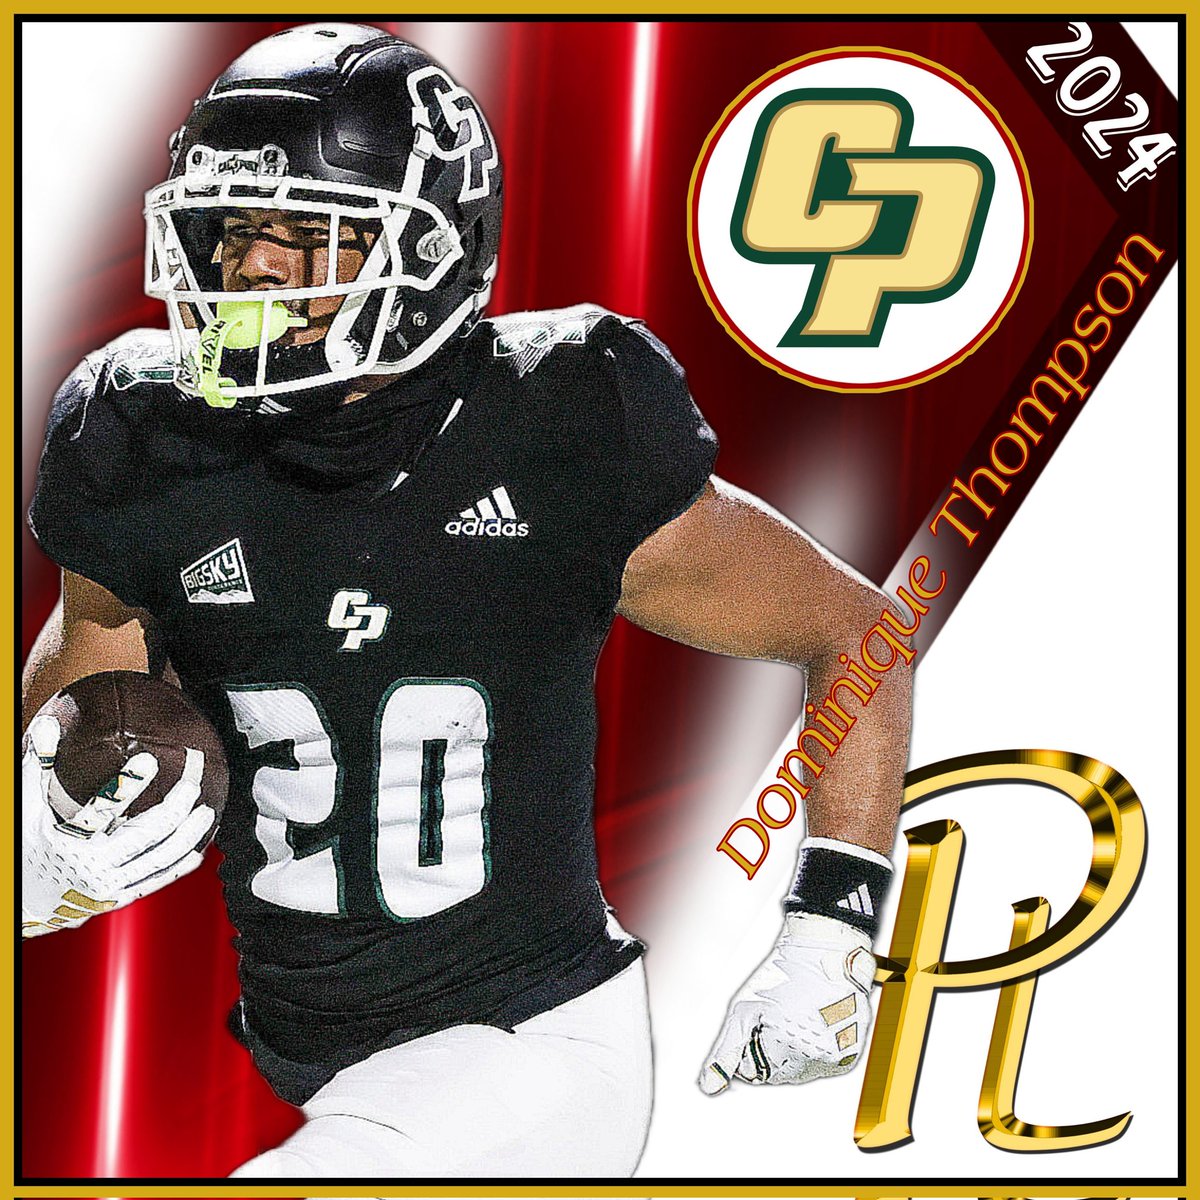 Welcome to the #ProLevelFamily @ProLevelAgents is excited to work with Dominique and assist him in his transition from a 2024 Draft Eligible collegiate athlete to a professional athlete. If you're seeking representation- please visit: prolevelagents.com/representation